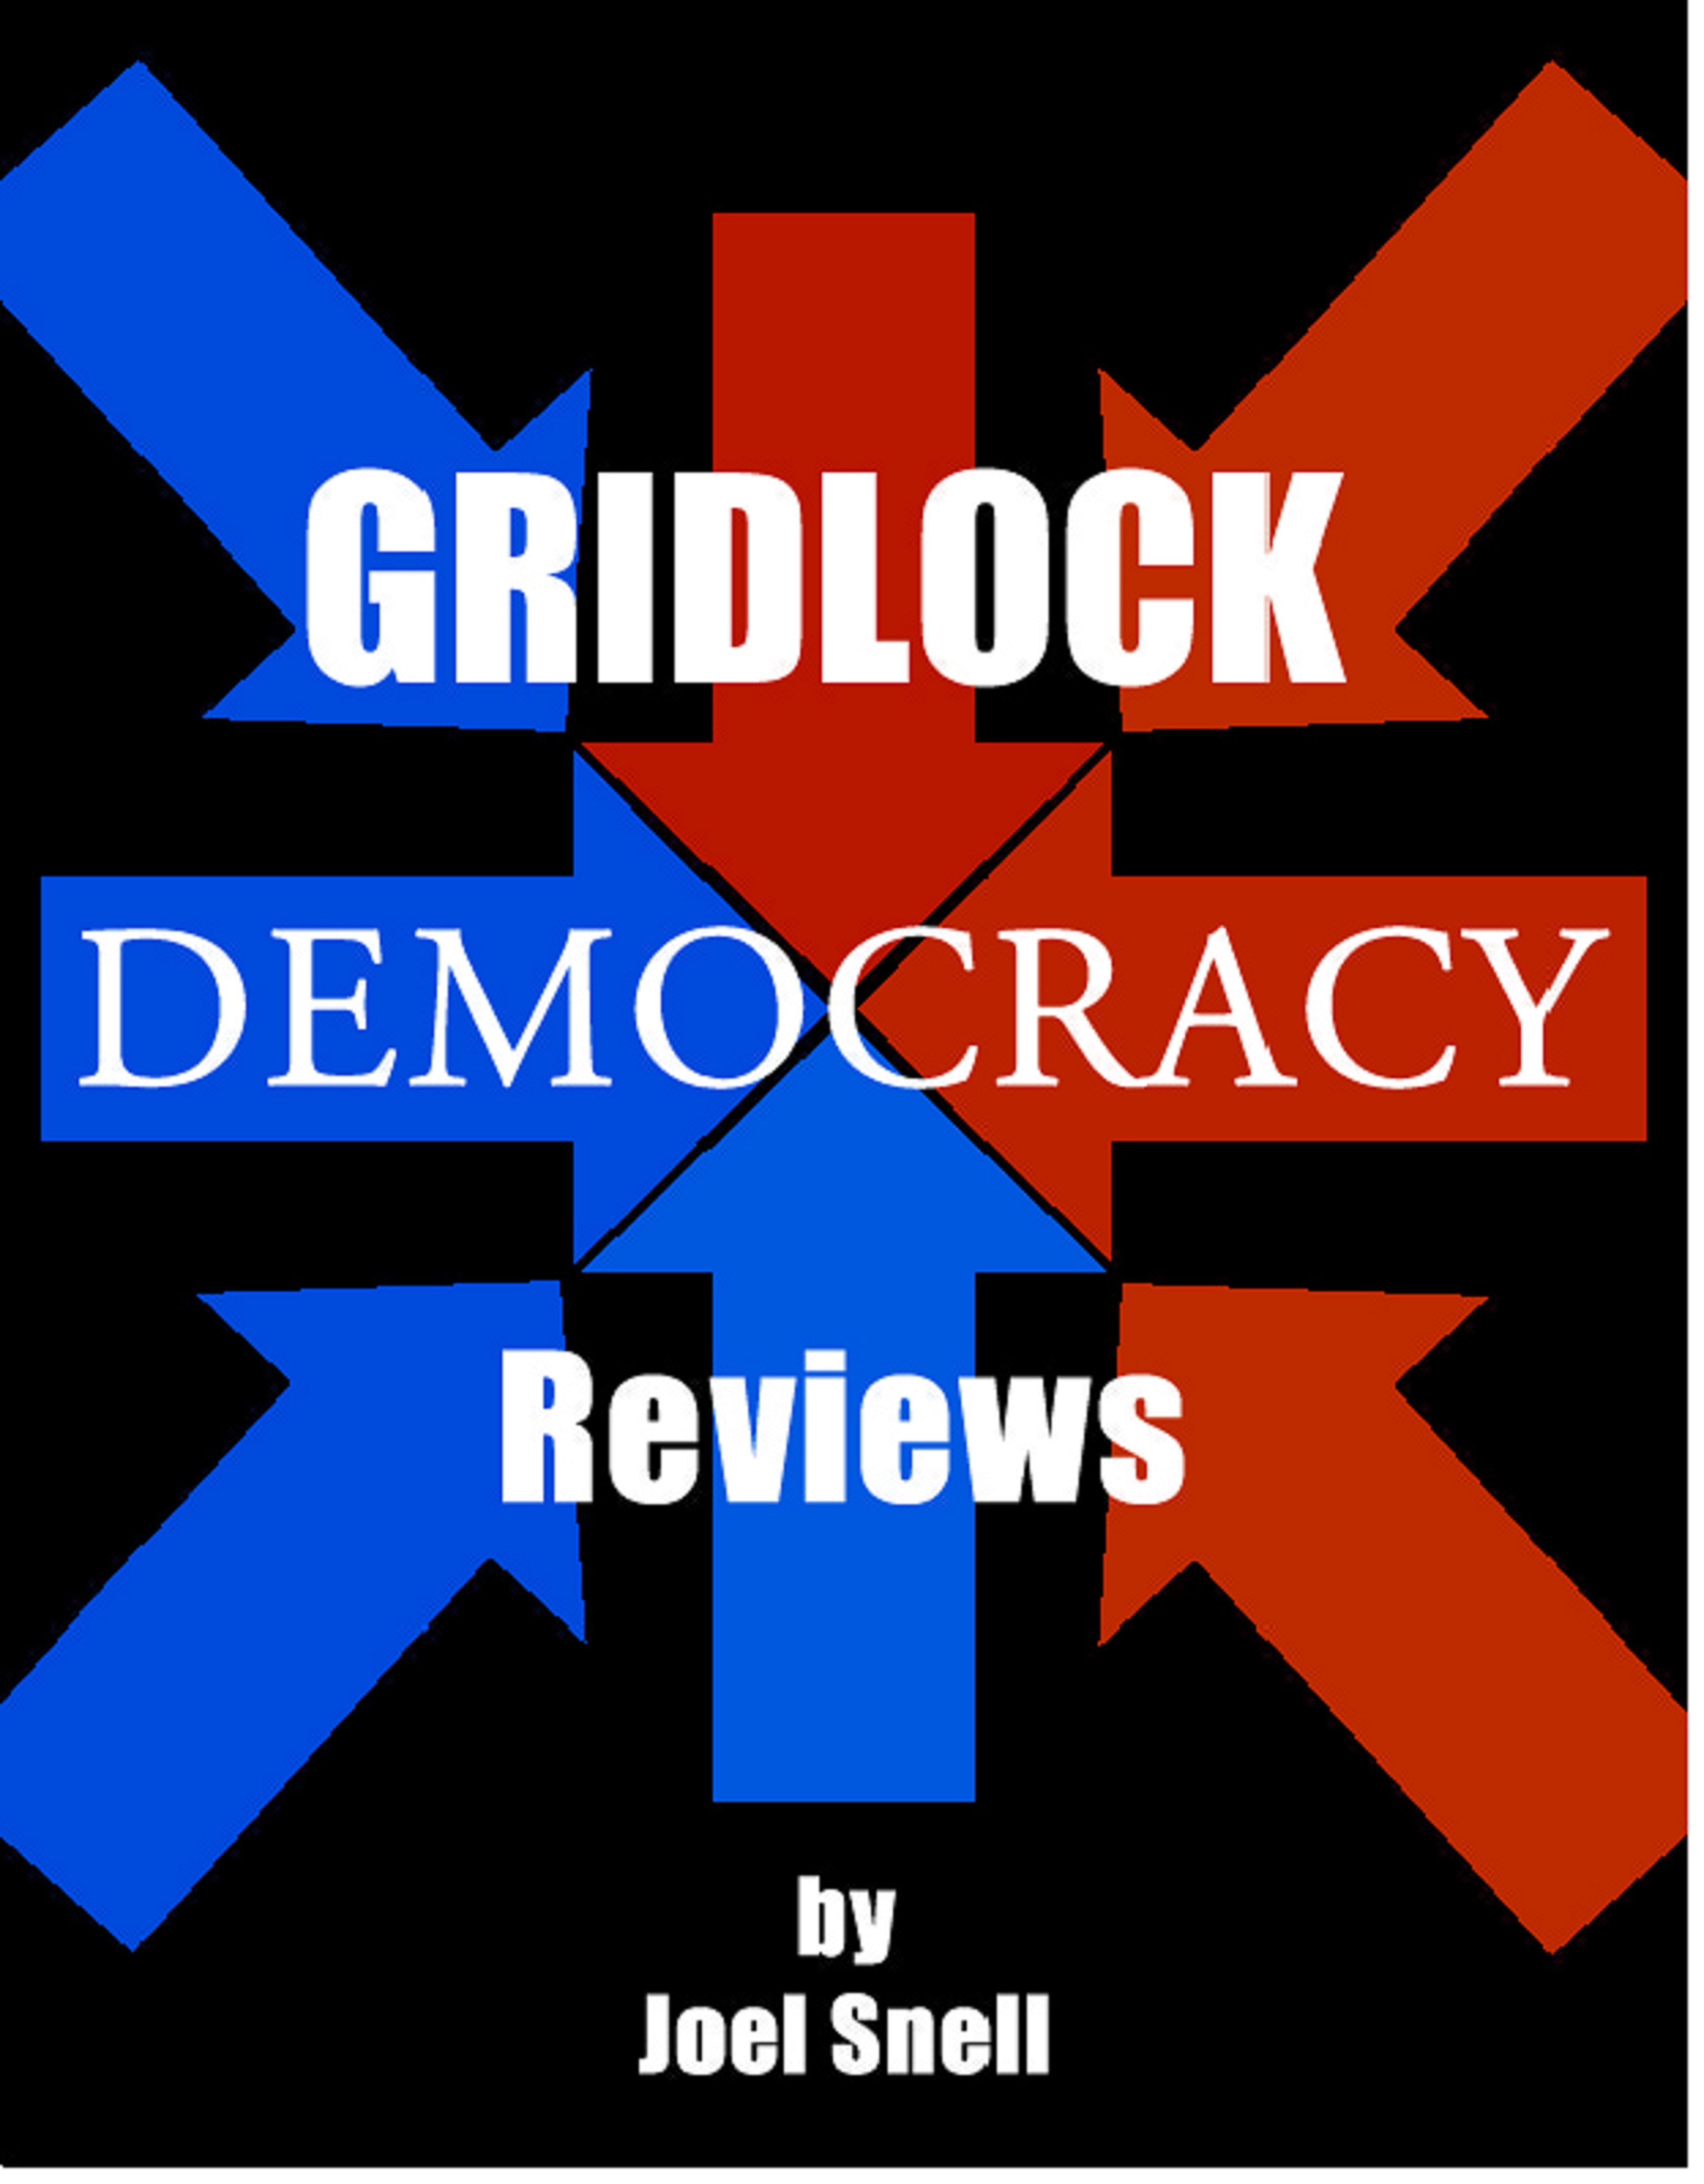 GRIDLOCK DEMOCRACY Reviews by Joel Snell